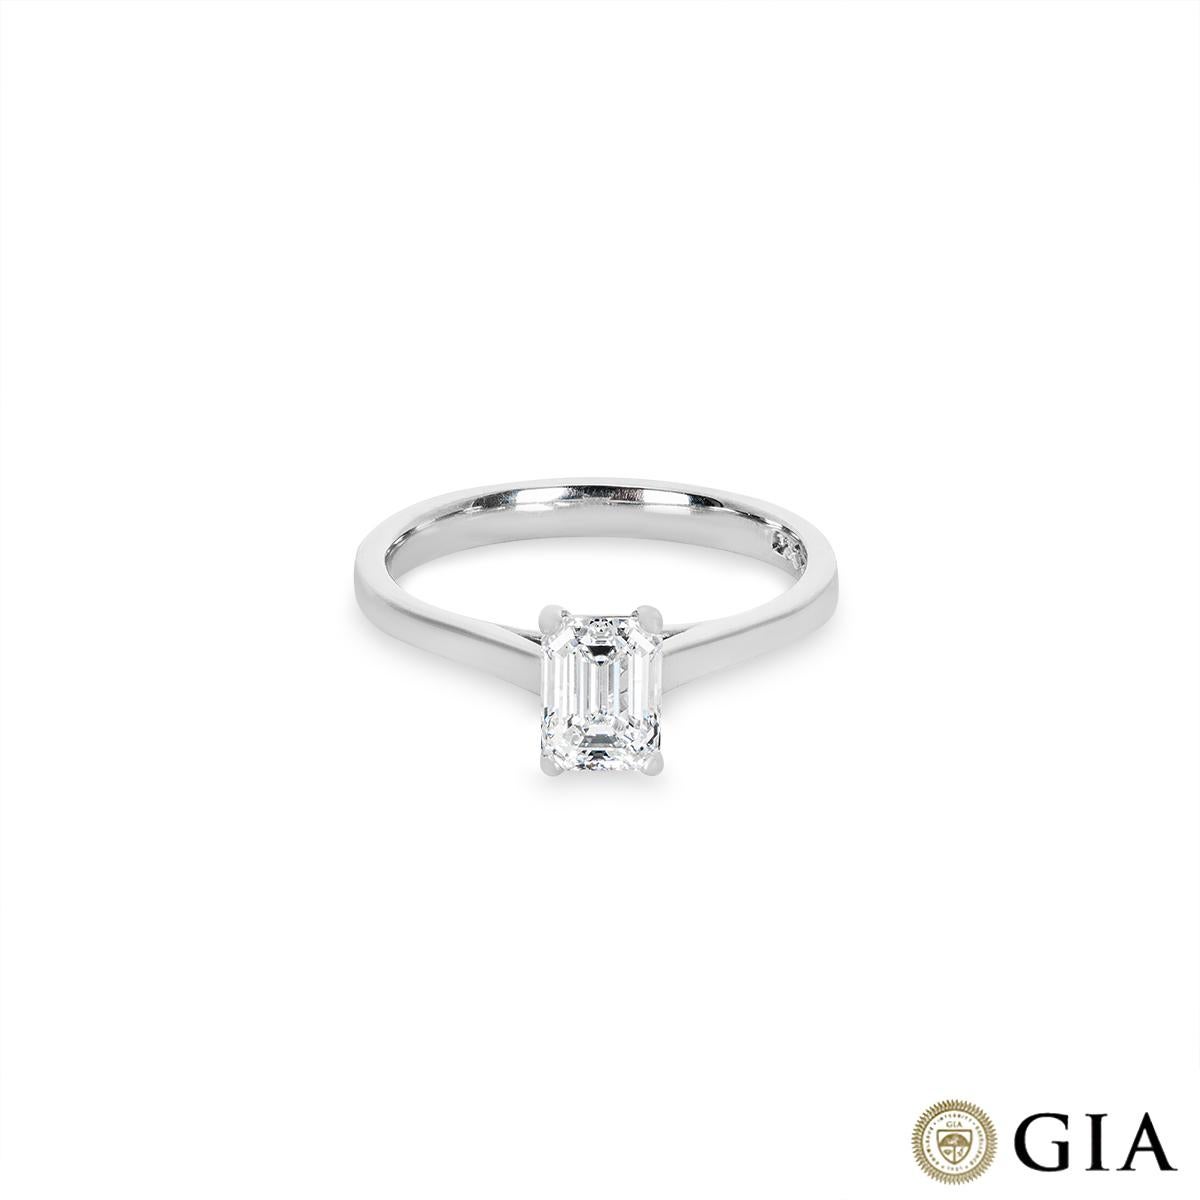 GIA Certified Platinum Emerald Cut Diamond Ring 0.74ct D/IF In Excellent Condition For Sale In London, GB